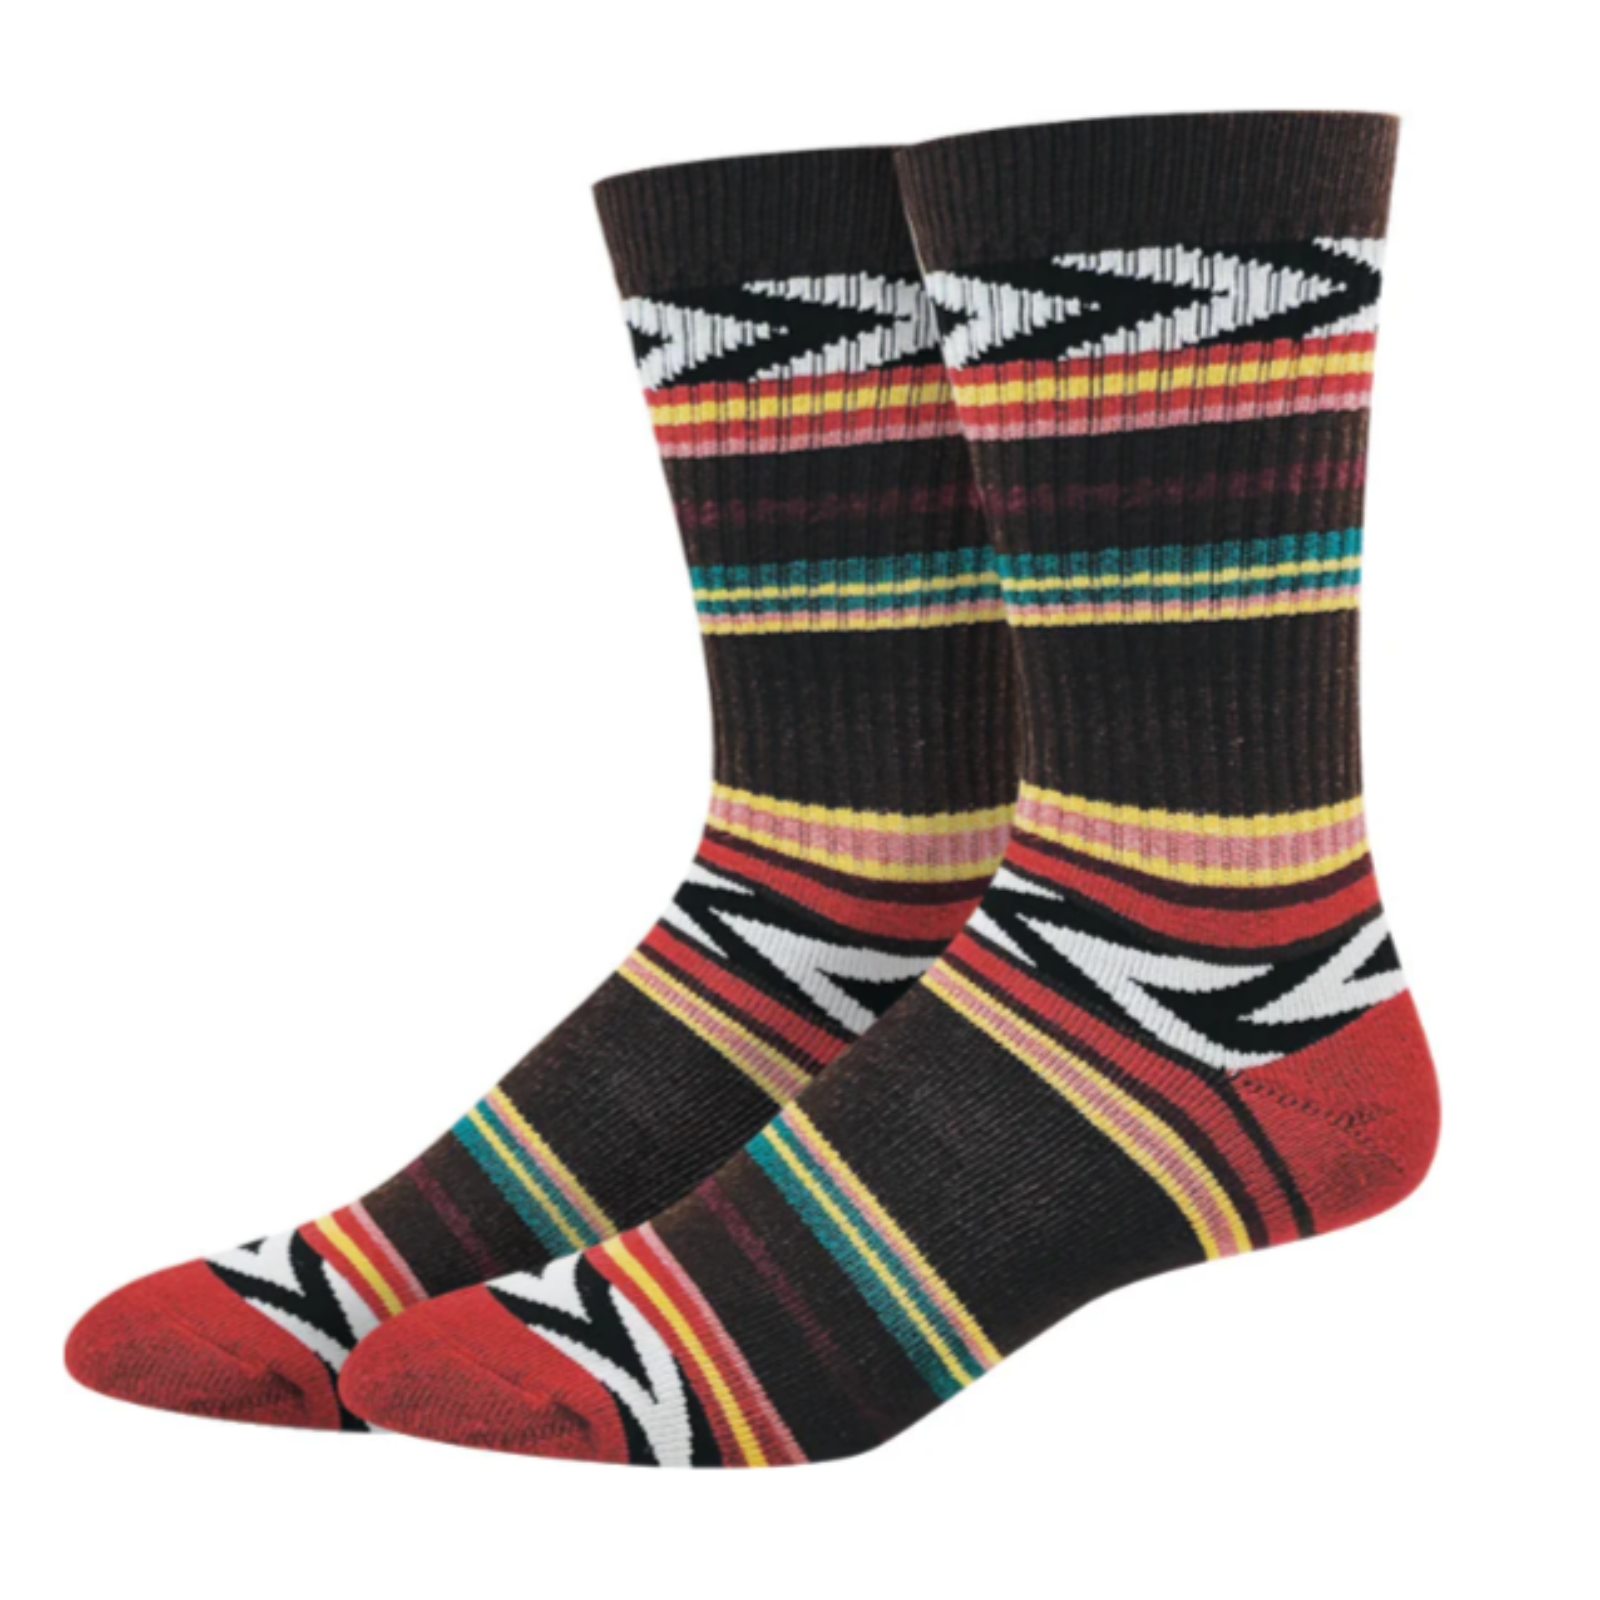 Sock Harbor Codorniz Active men's crew sock featuring brown sock with various colored stripes all over on display foot